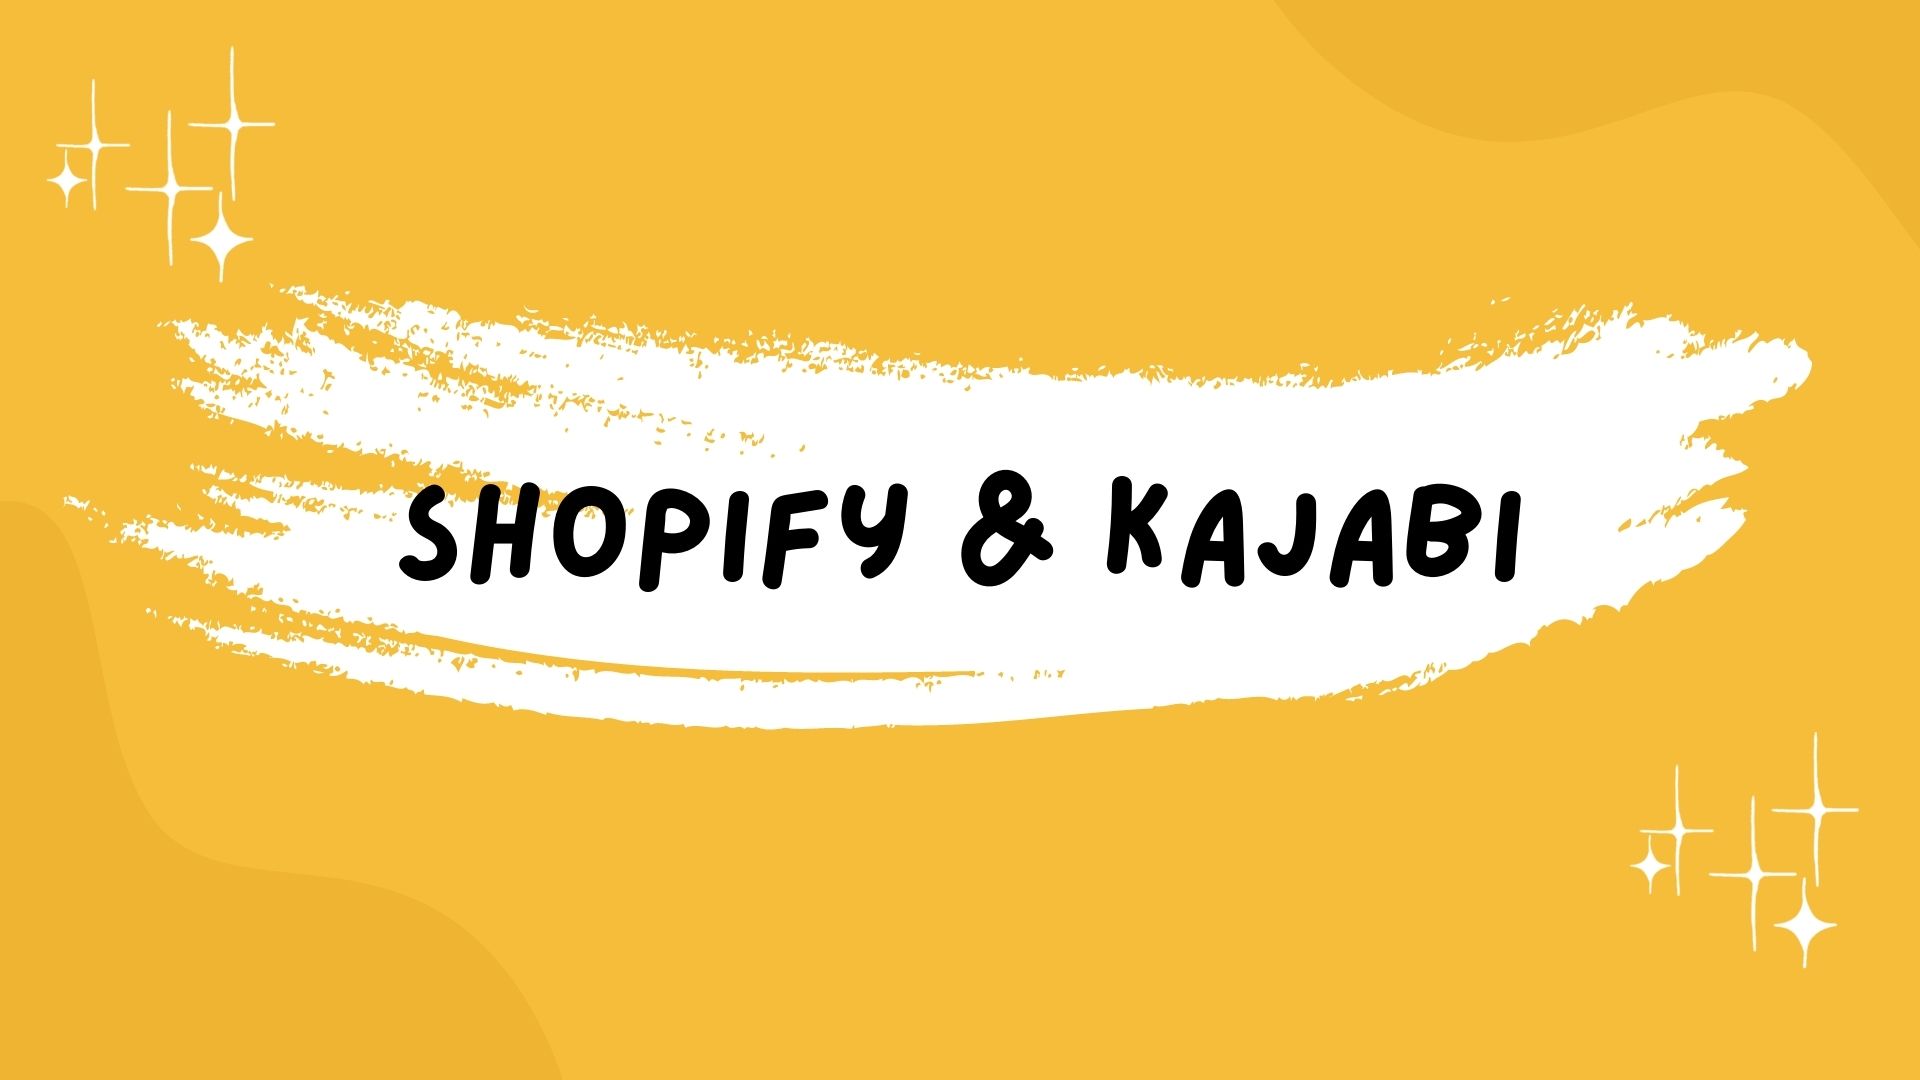 Does Kajabi Integrate with Shopify